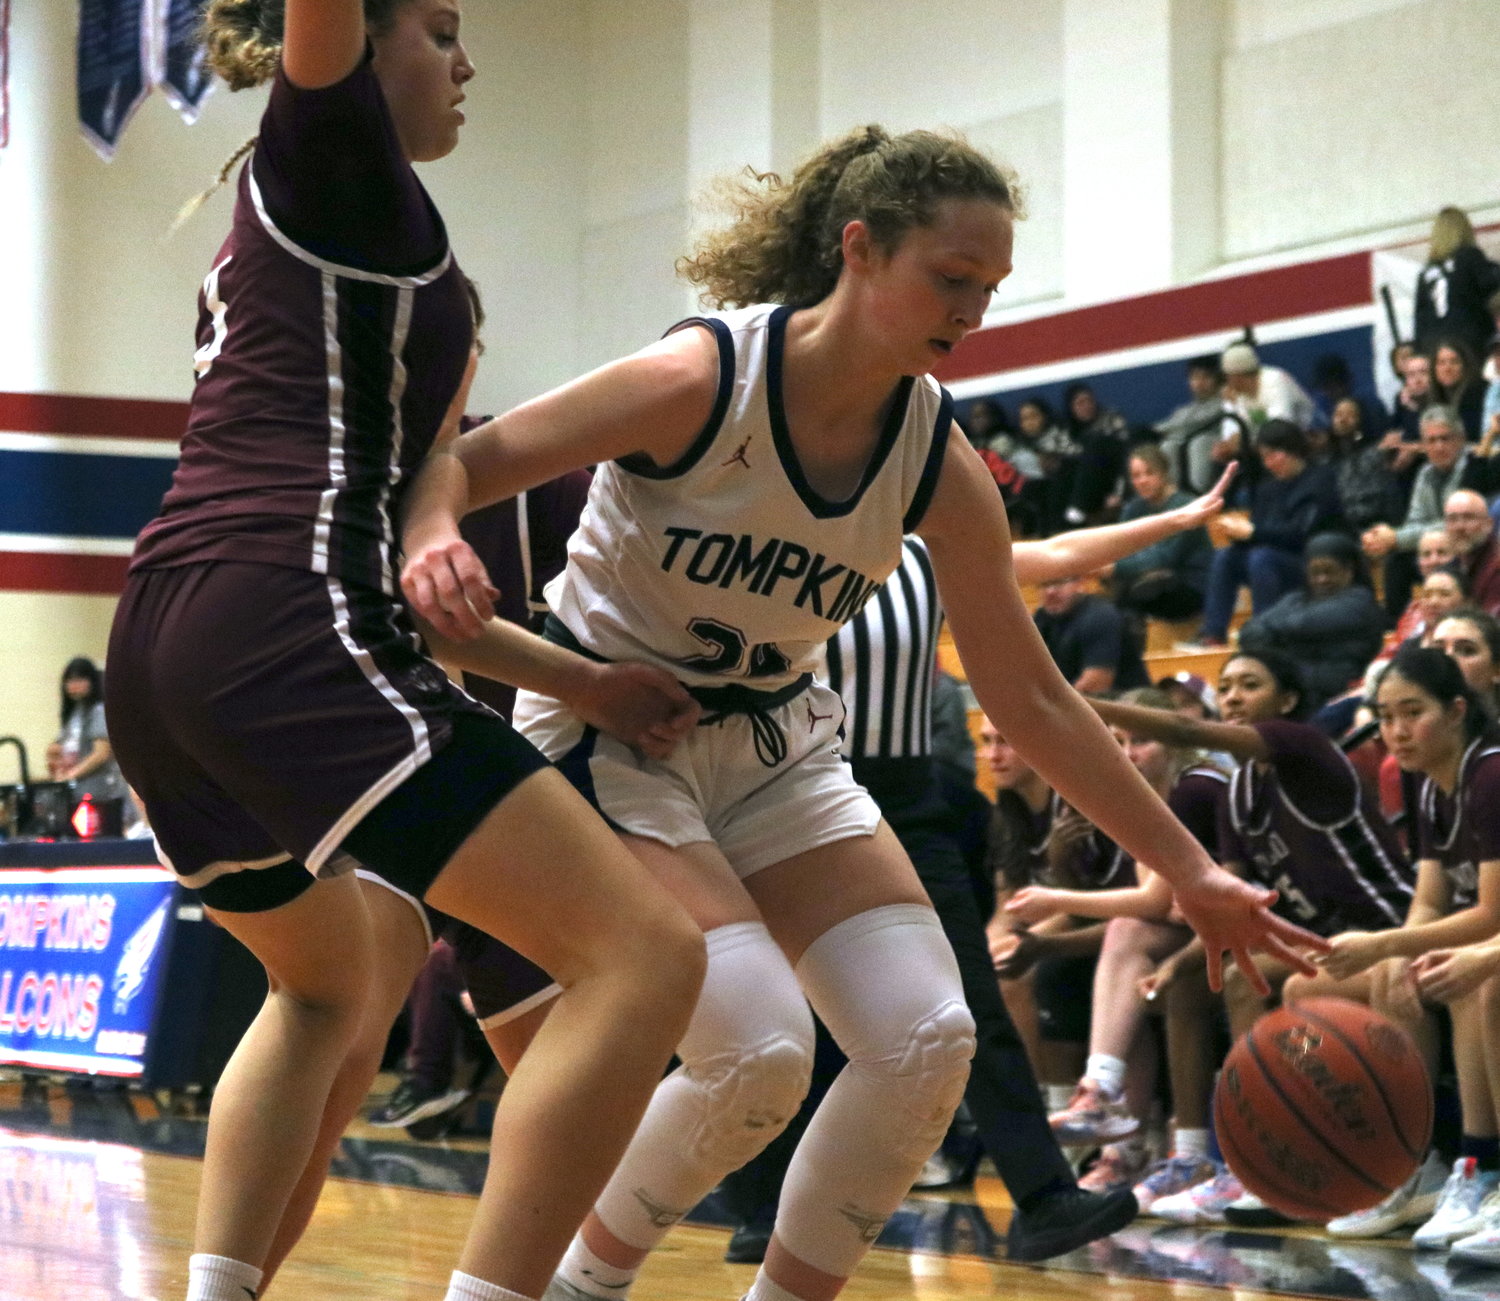 Gabby Panter dribbles towards the sideline during Friday’s game between Tompkins and Cinco Ranch at the Tompkins gym.